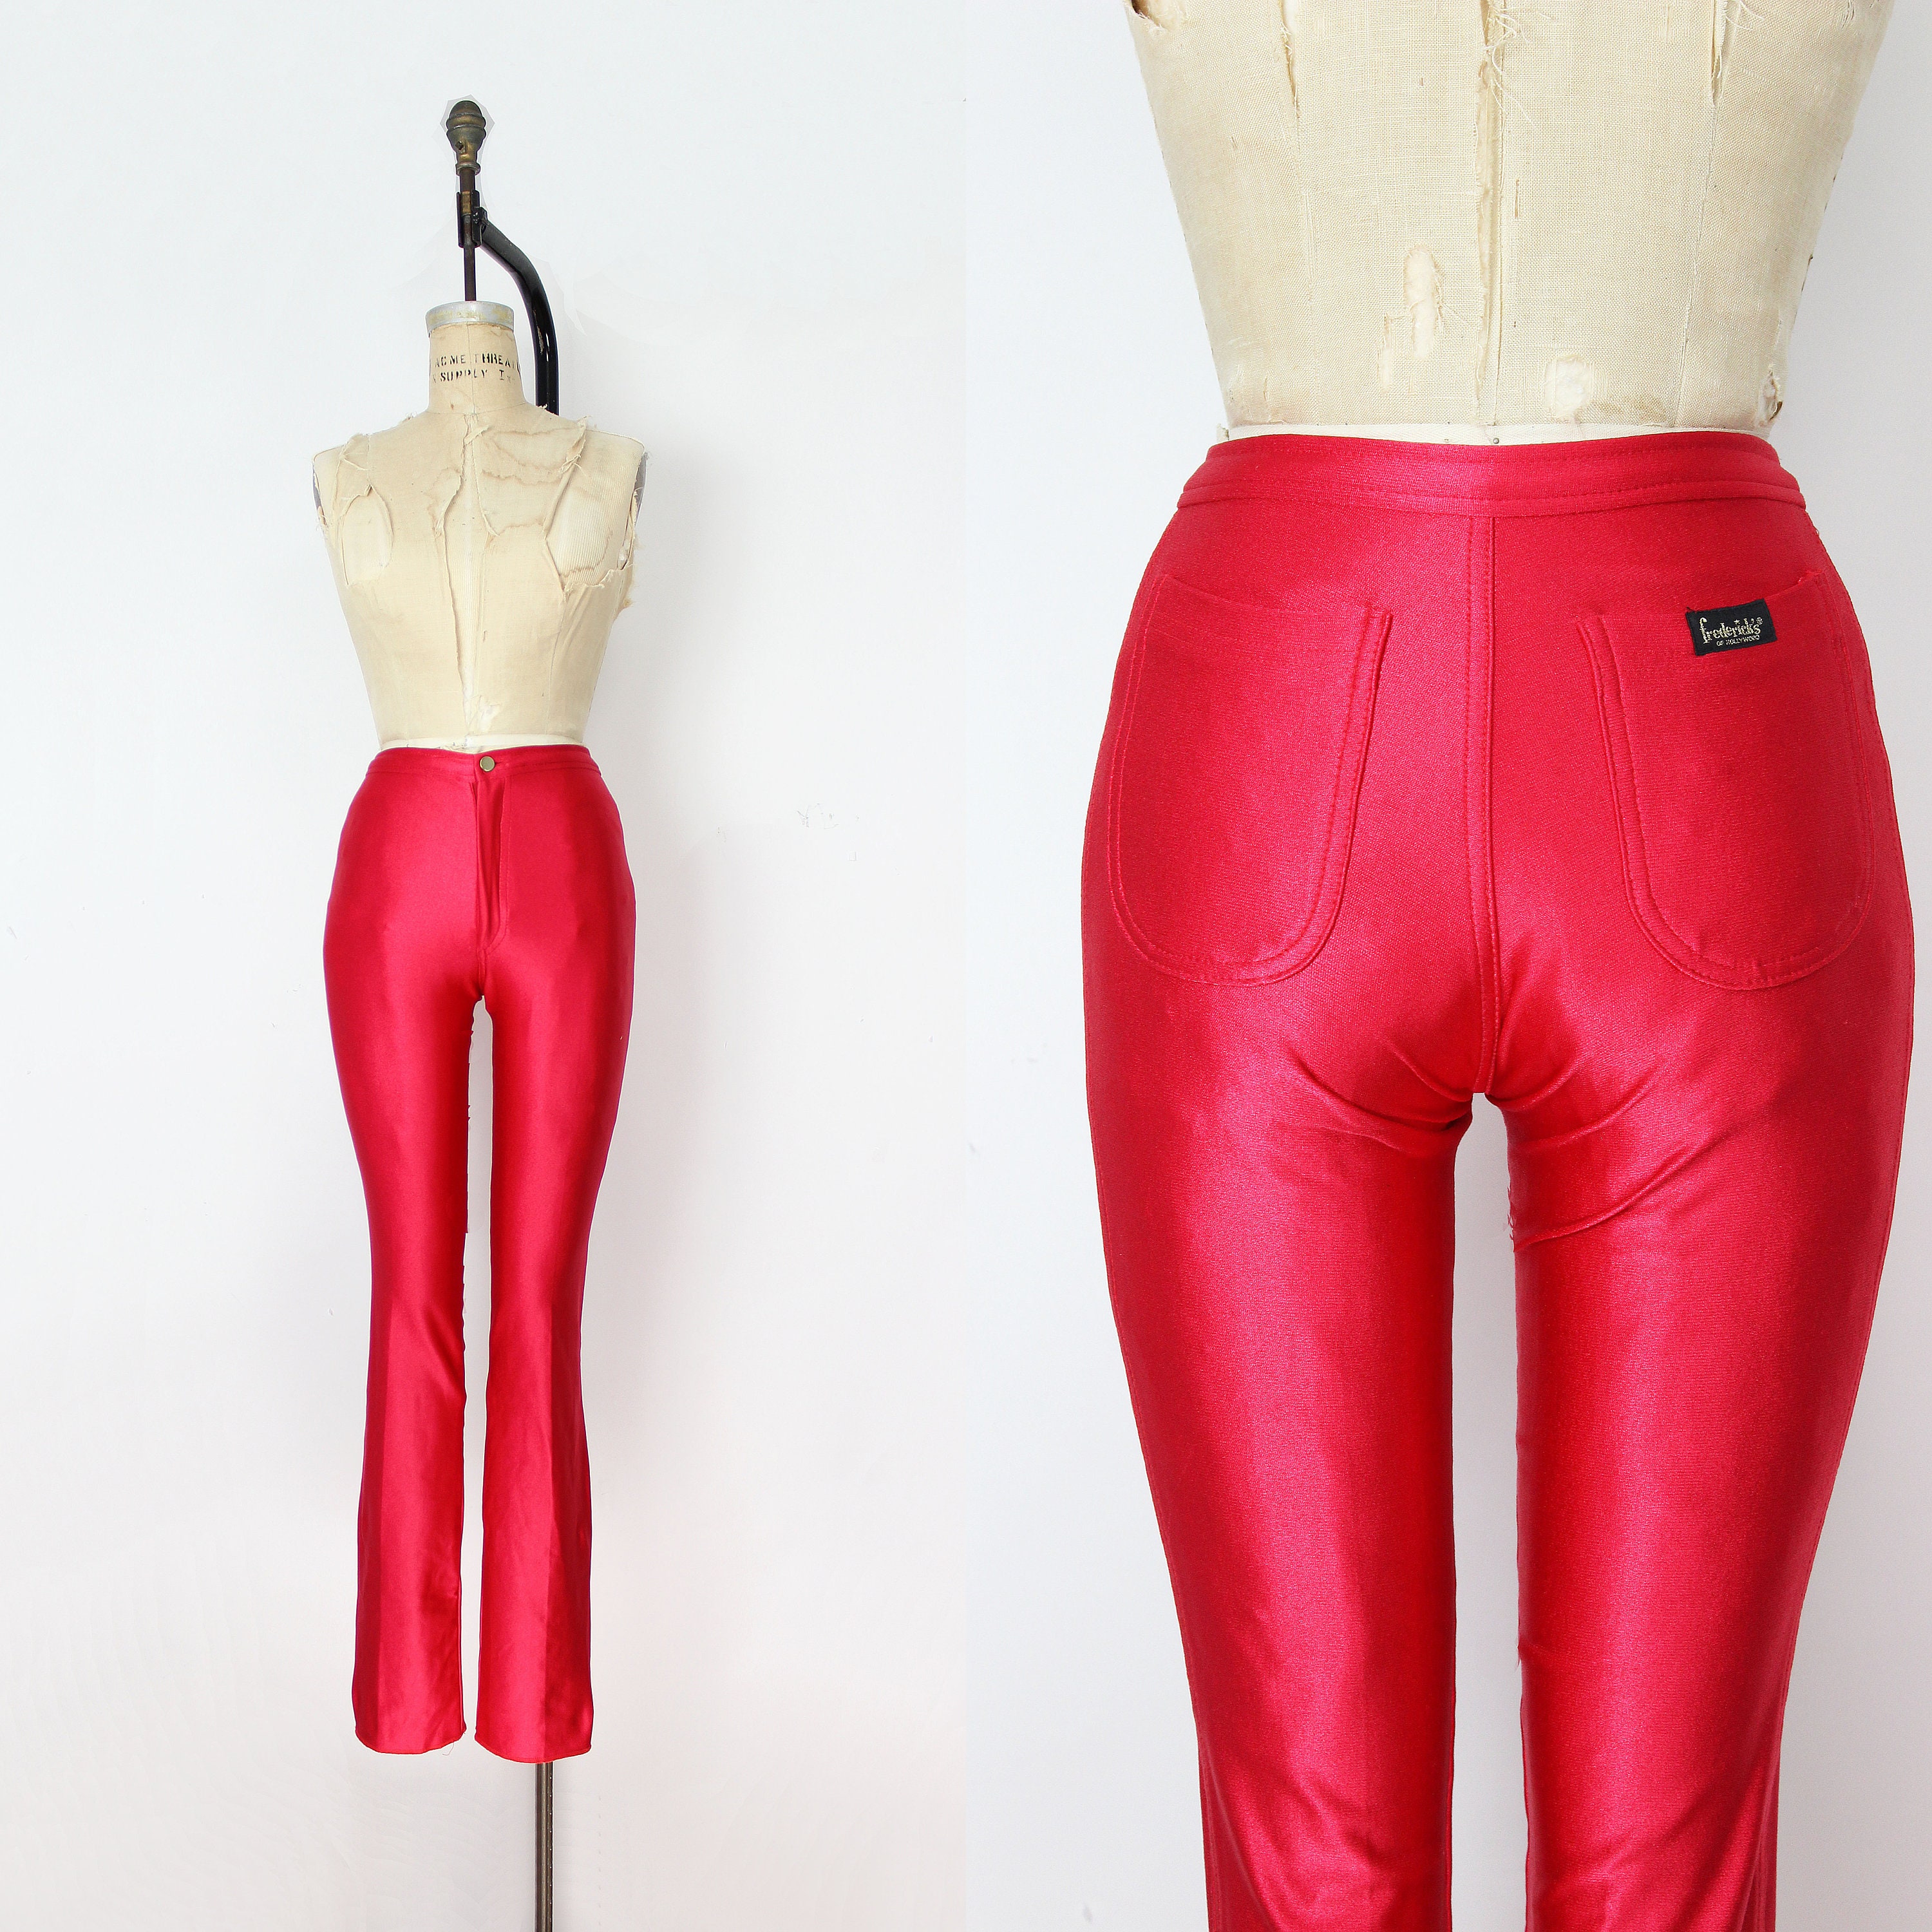 vintage 70s disco pants / 1970s liquid red satin pants / FREDERICKS of  Hollywood disco pants / nos nwt Frederick's of Hollywood